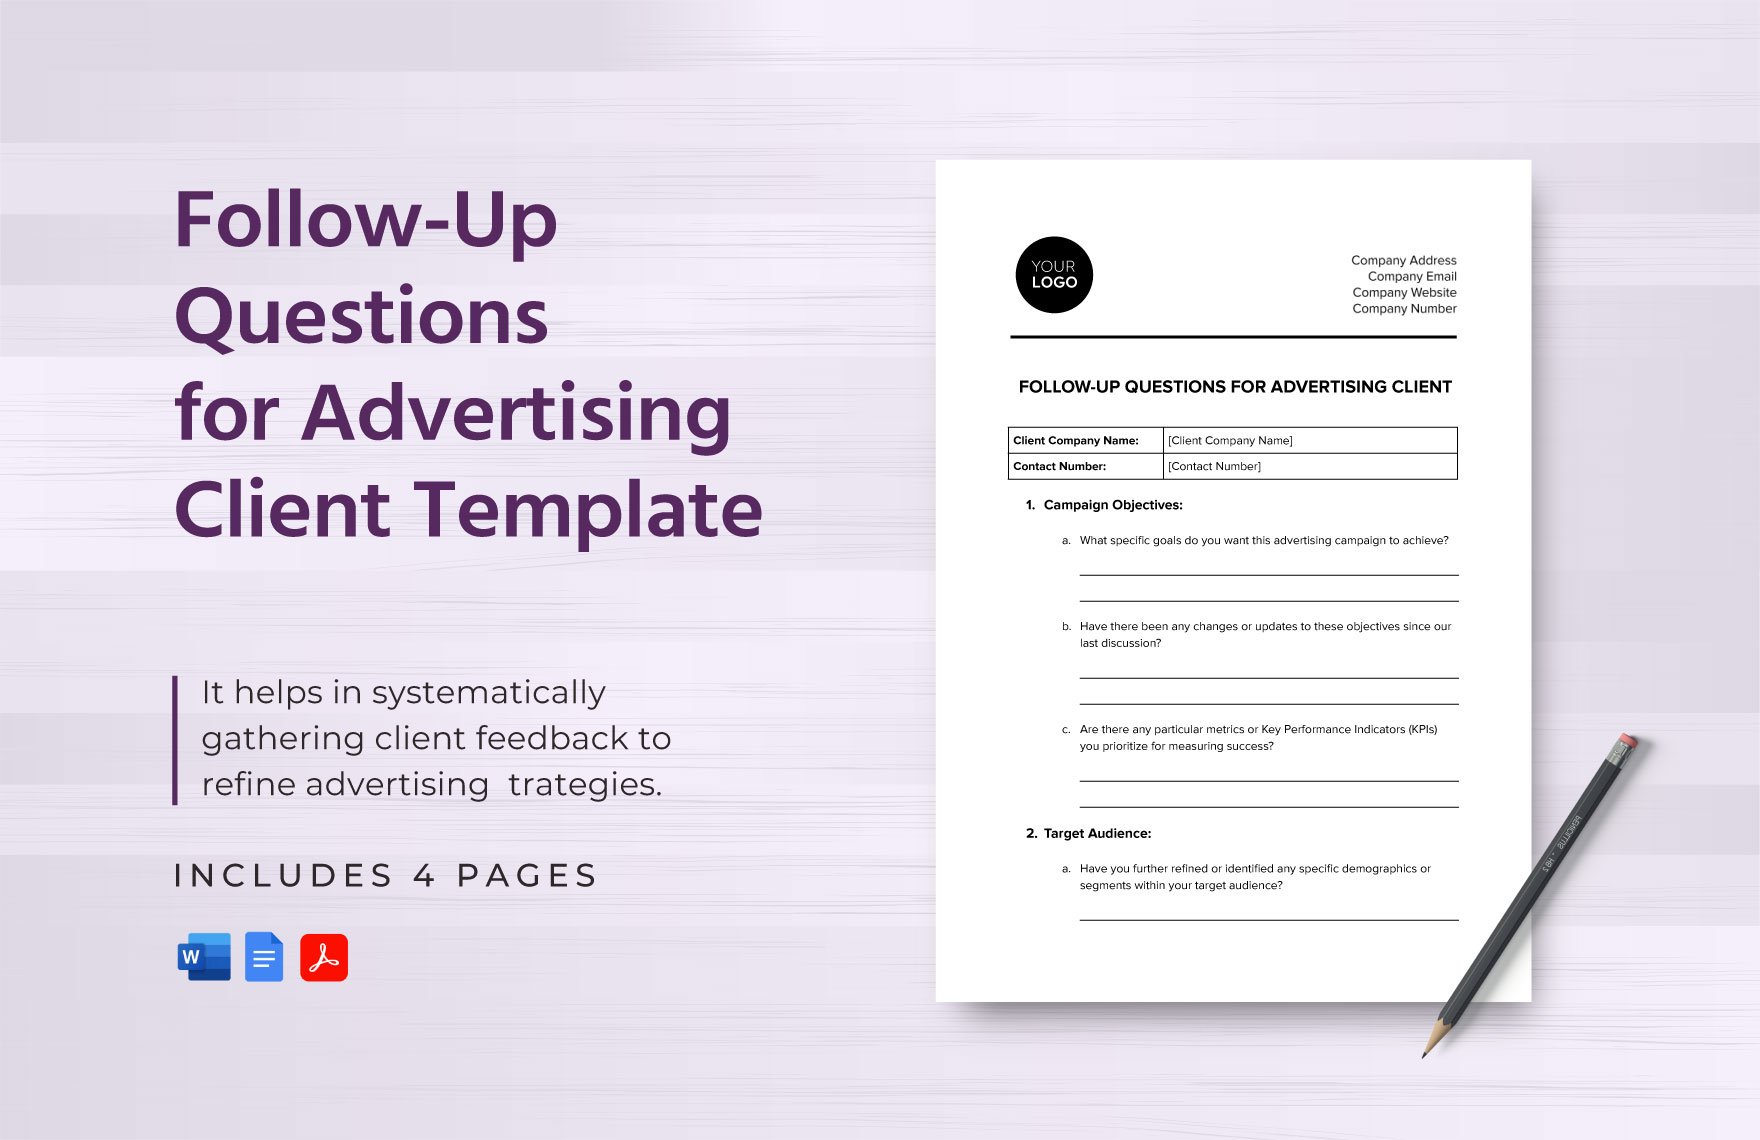 Follow-Up Questions for Advertising Client Template